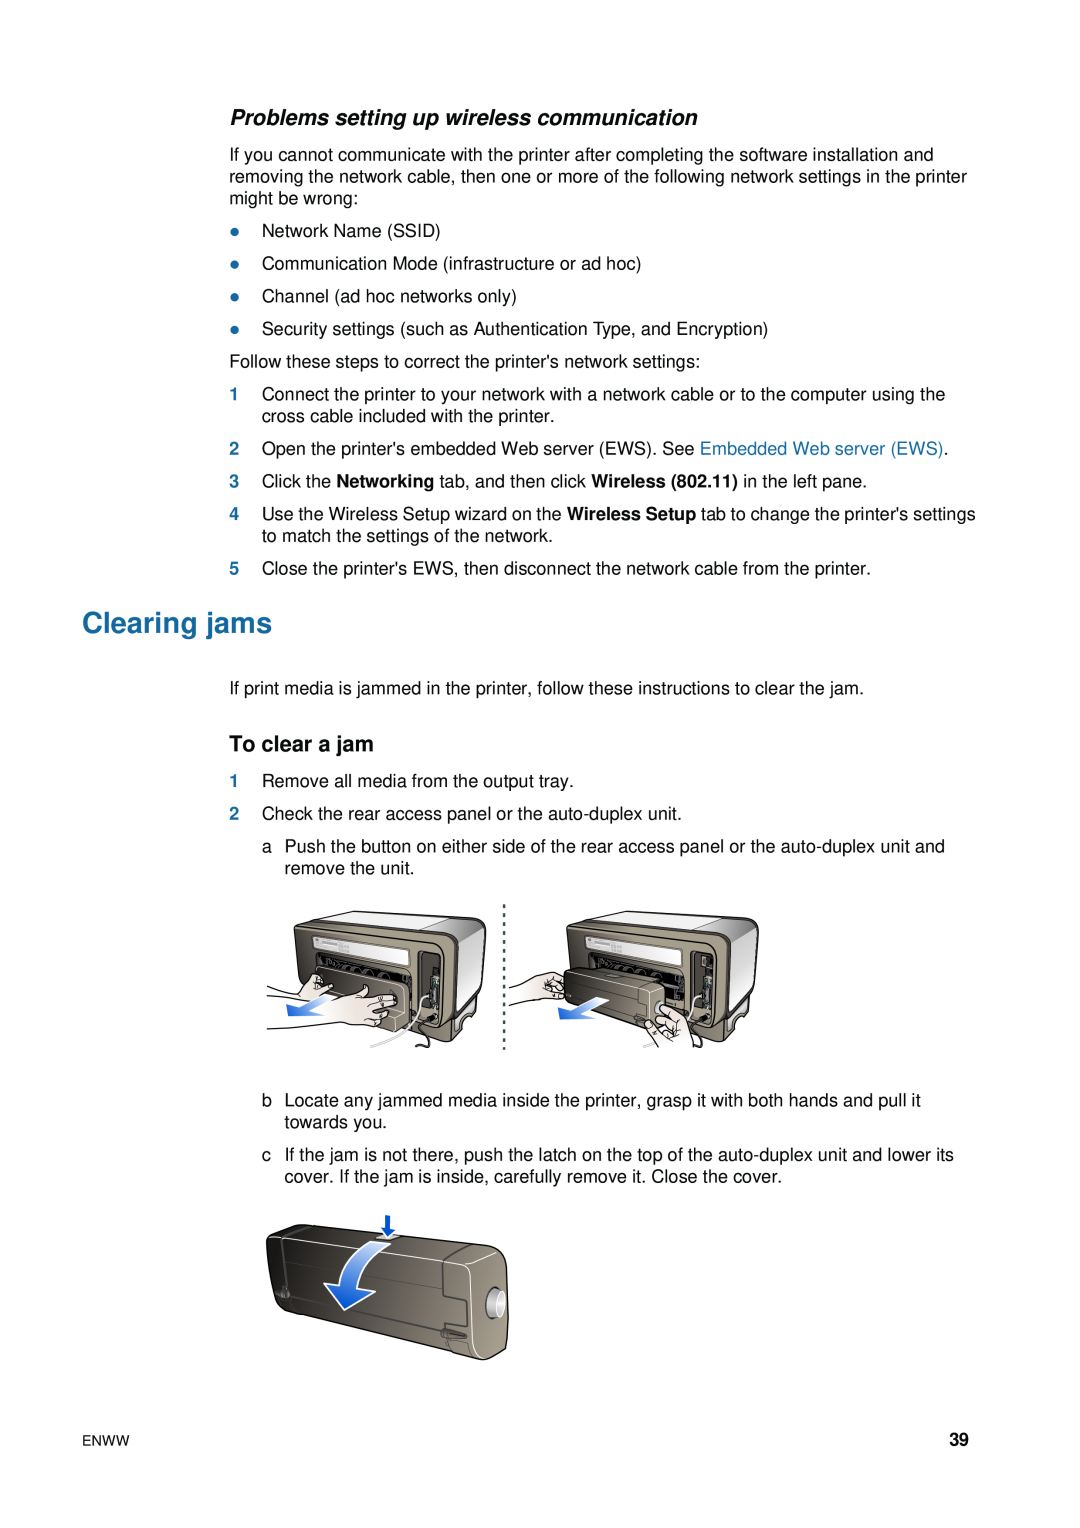 HP 1200 manual Clearing jams, Problems setting up wireless communication, To clear a jam 